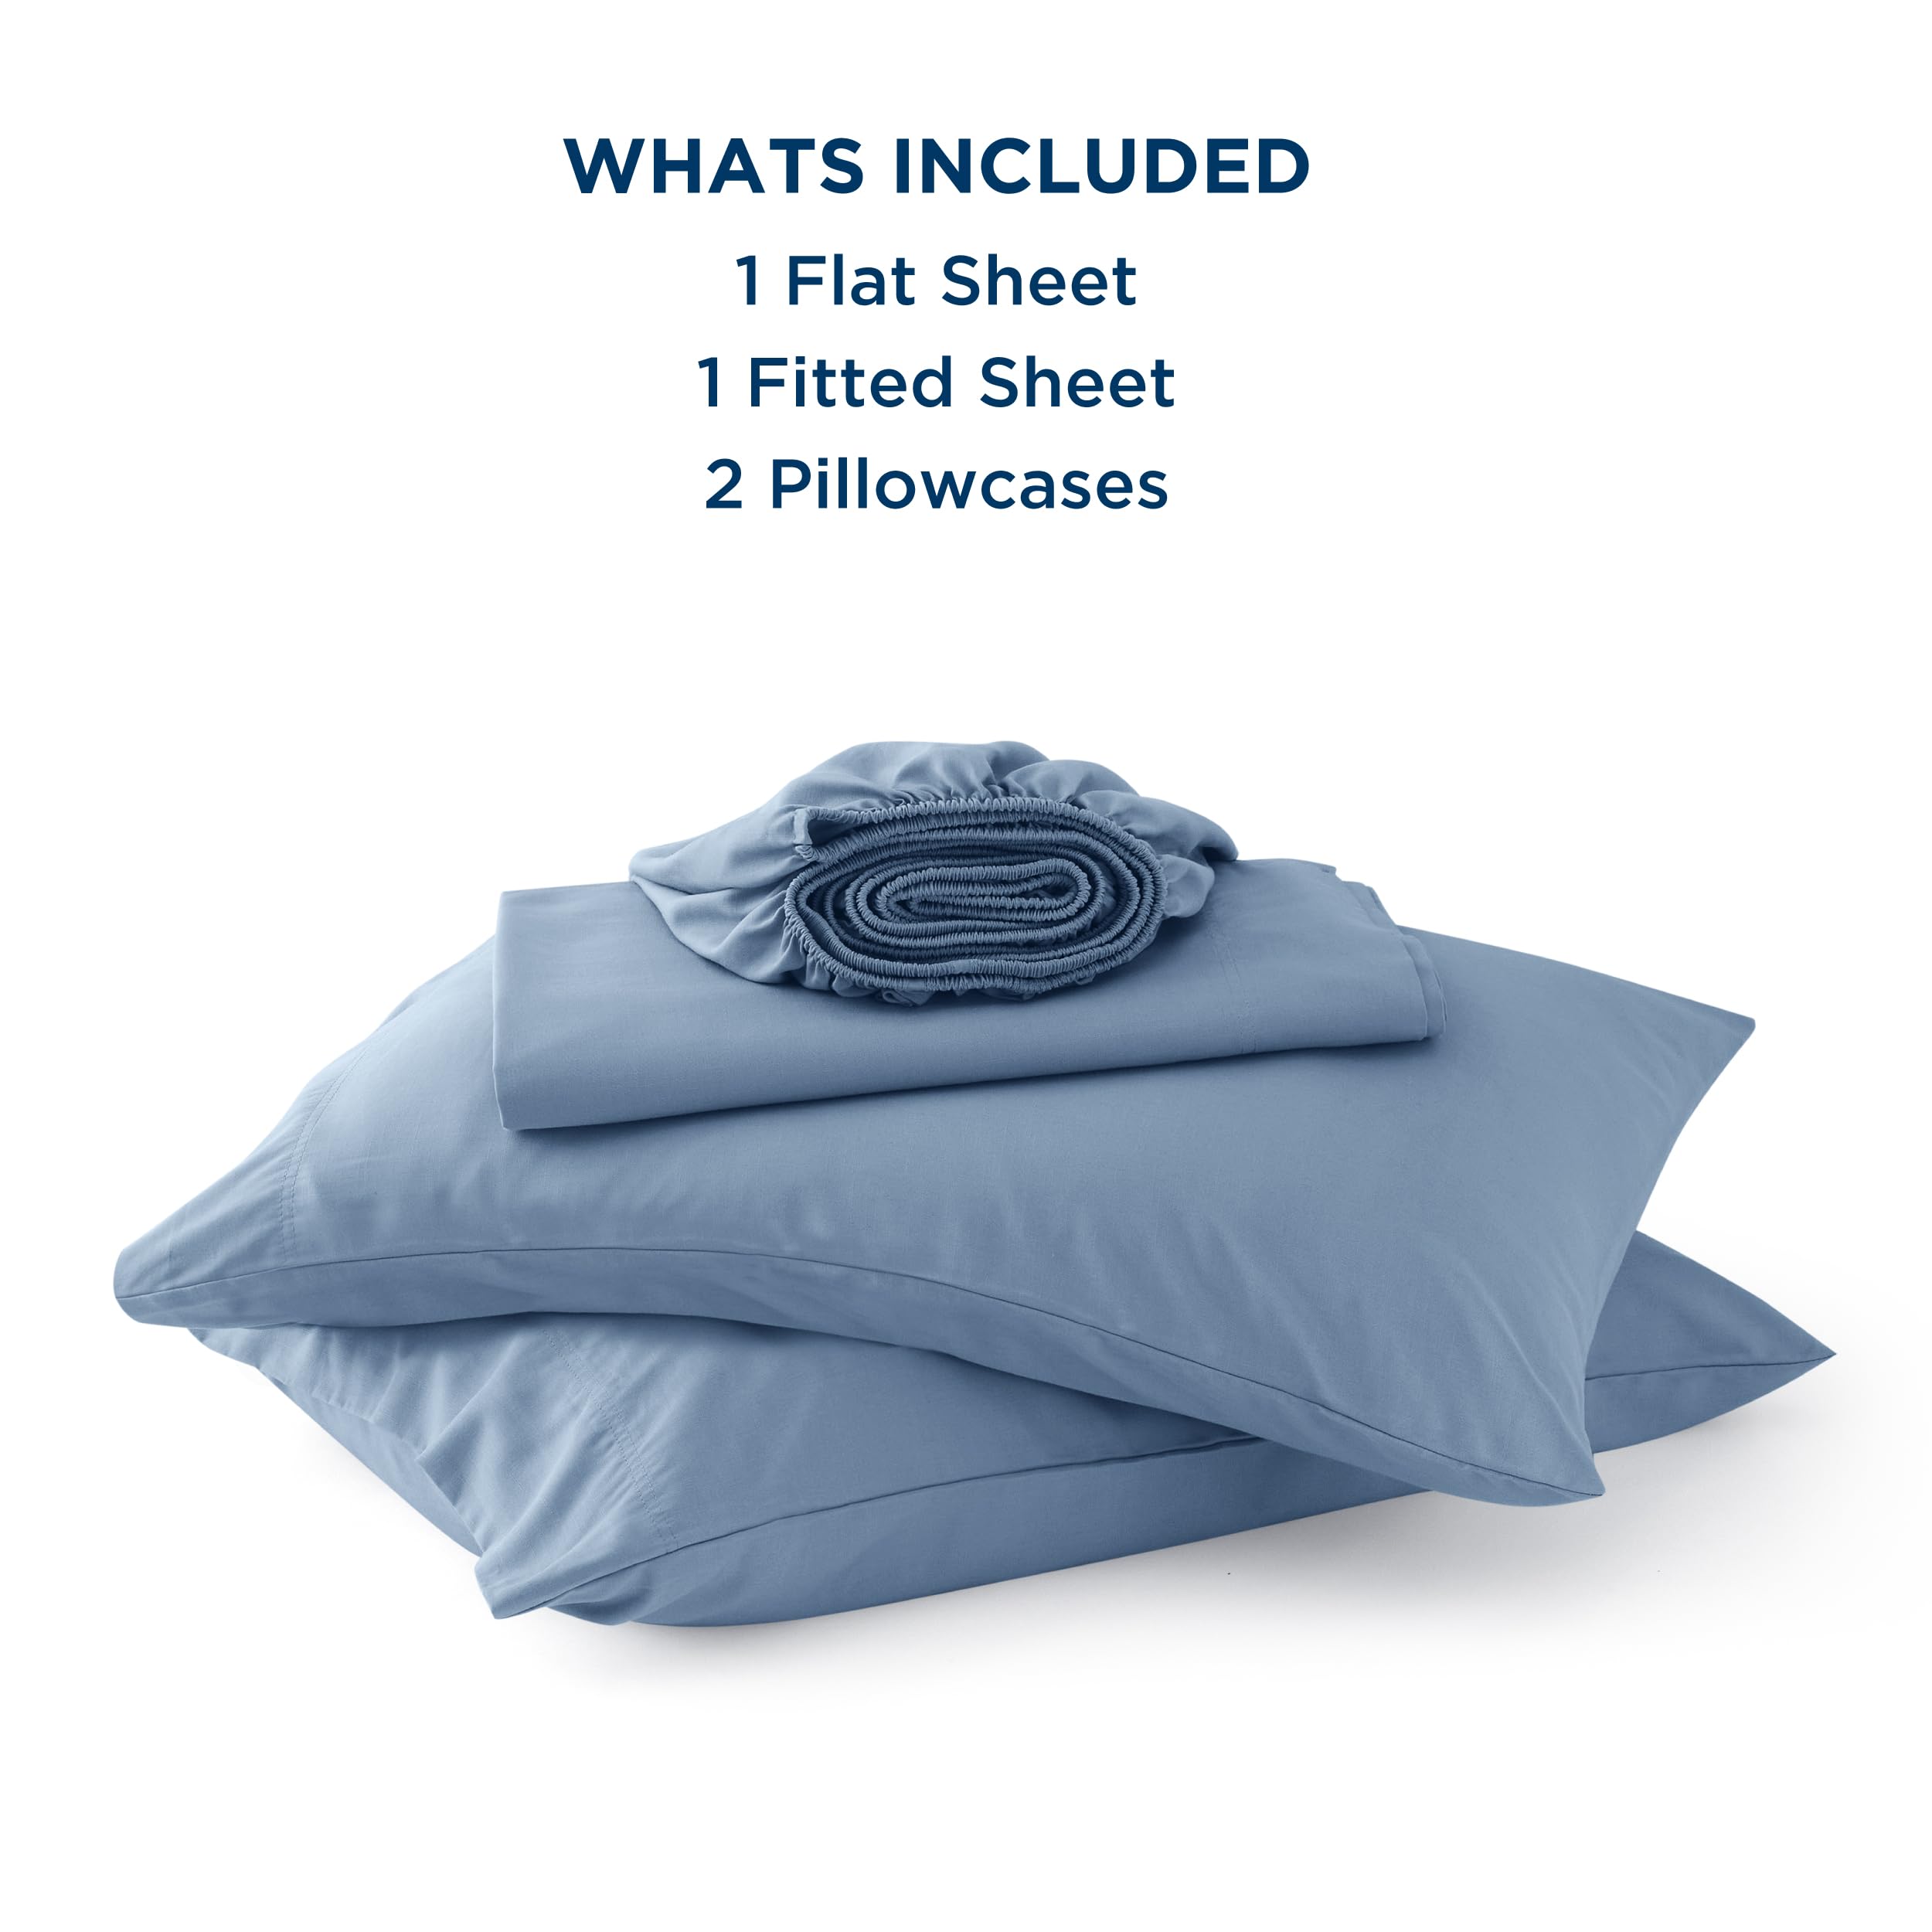 Rayon Derived from Bamboo and Lnen Sheet Set